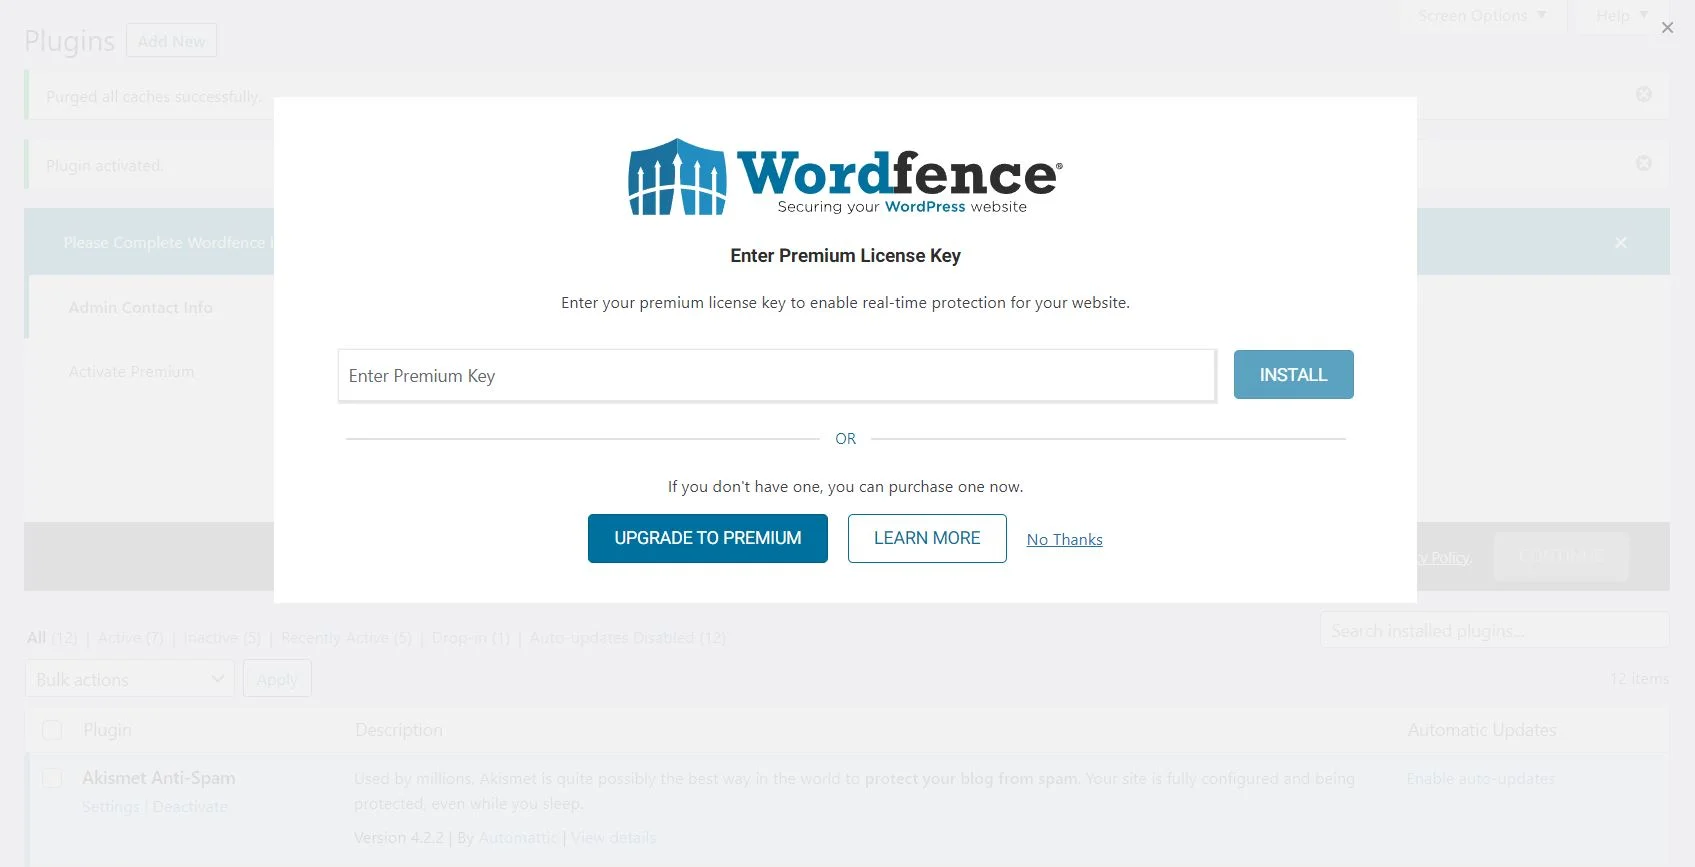 How To Install Wordfence Guide - Configuring Step 2